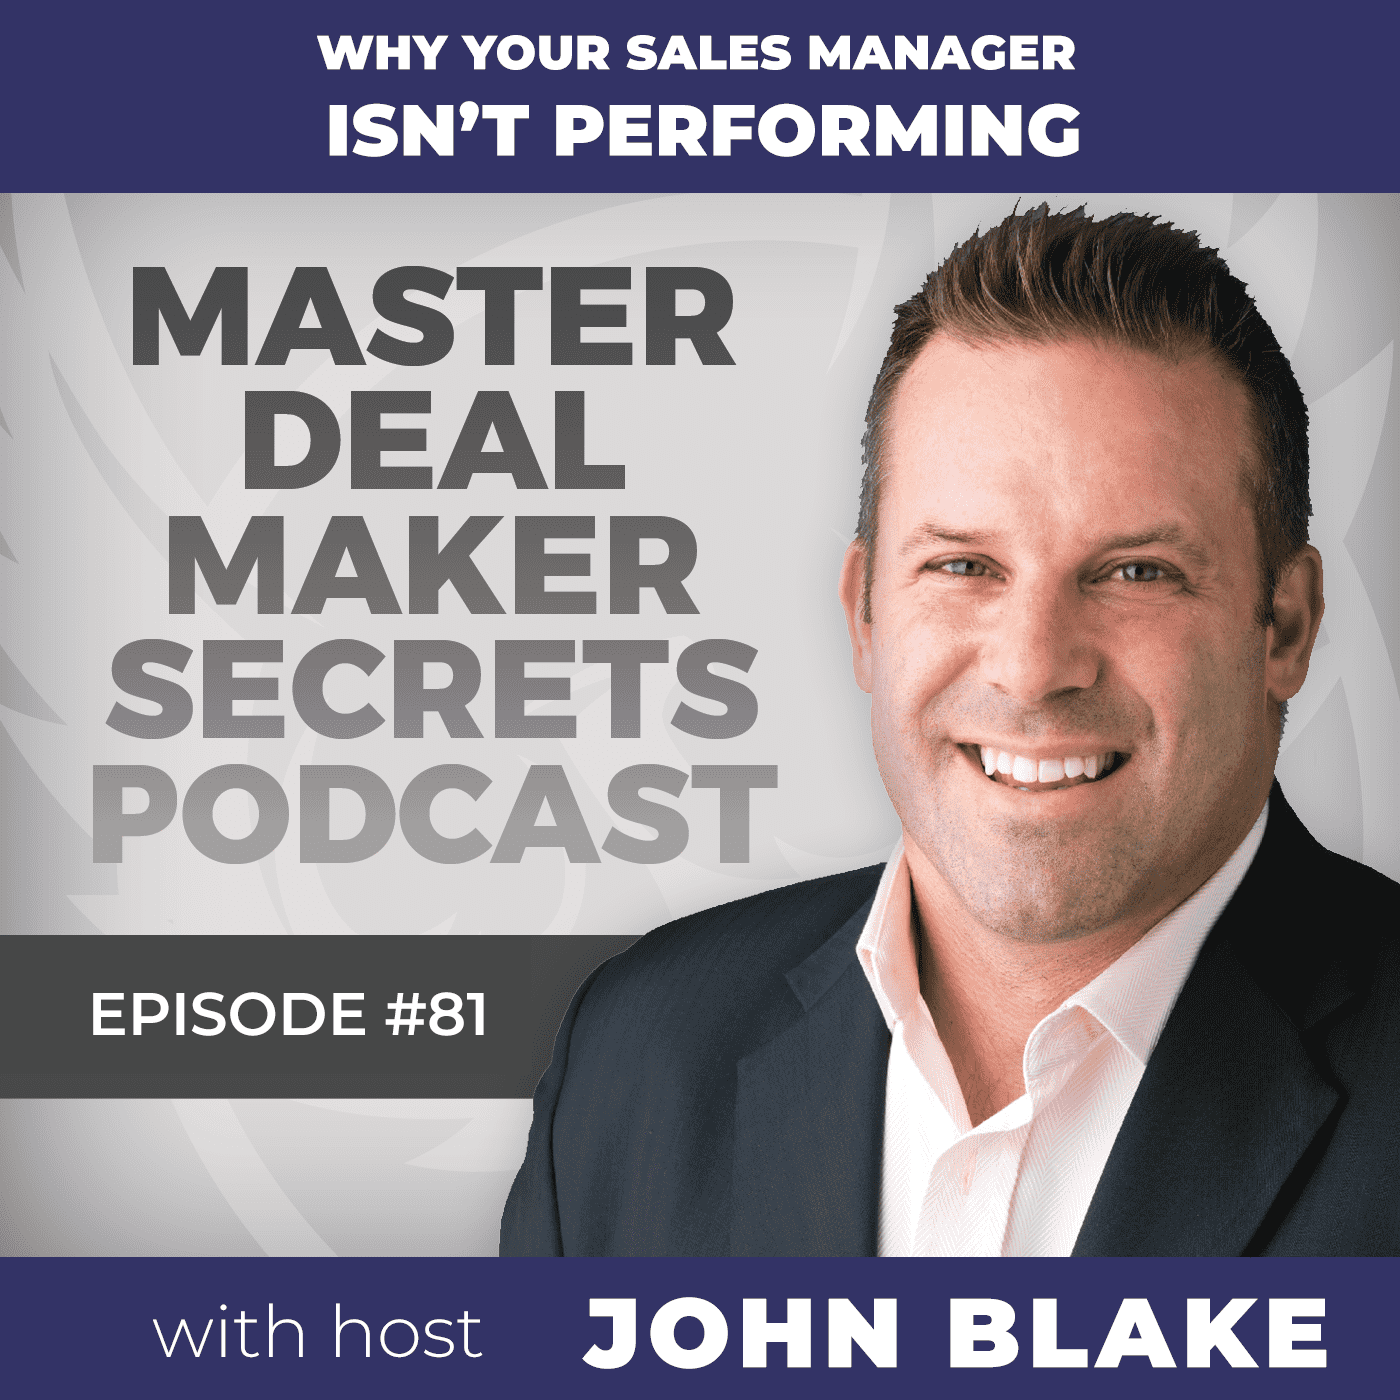 John Blake Why Your Sales Manager Isn't Performing